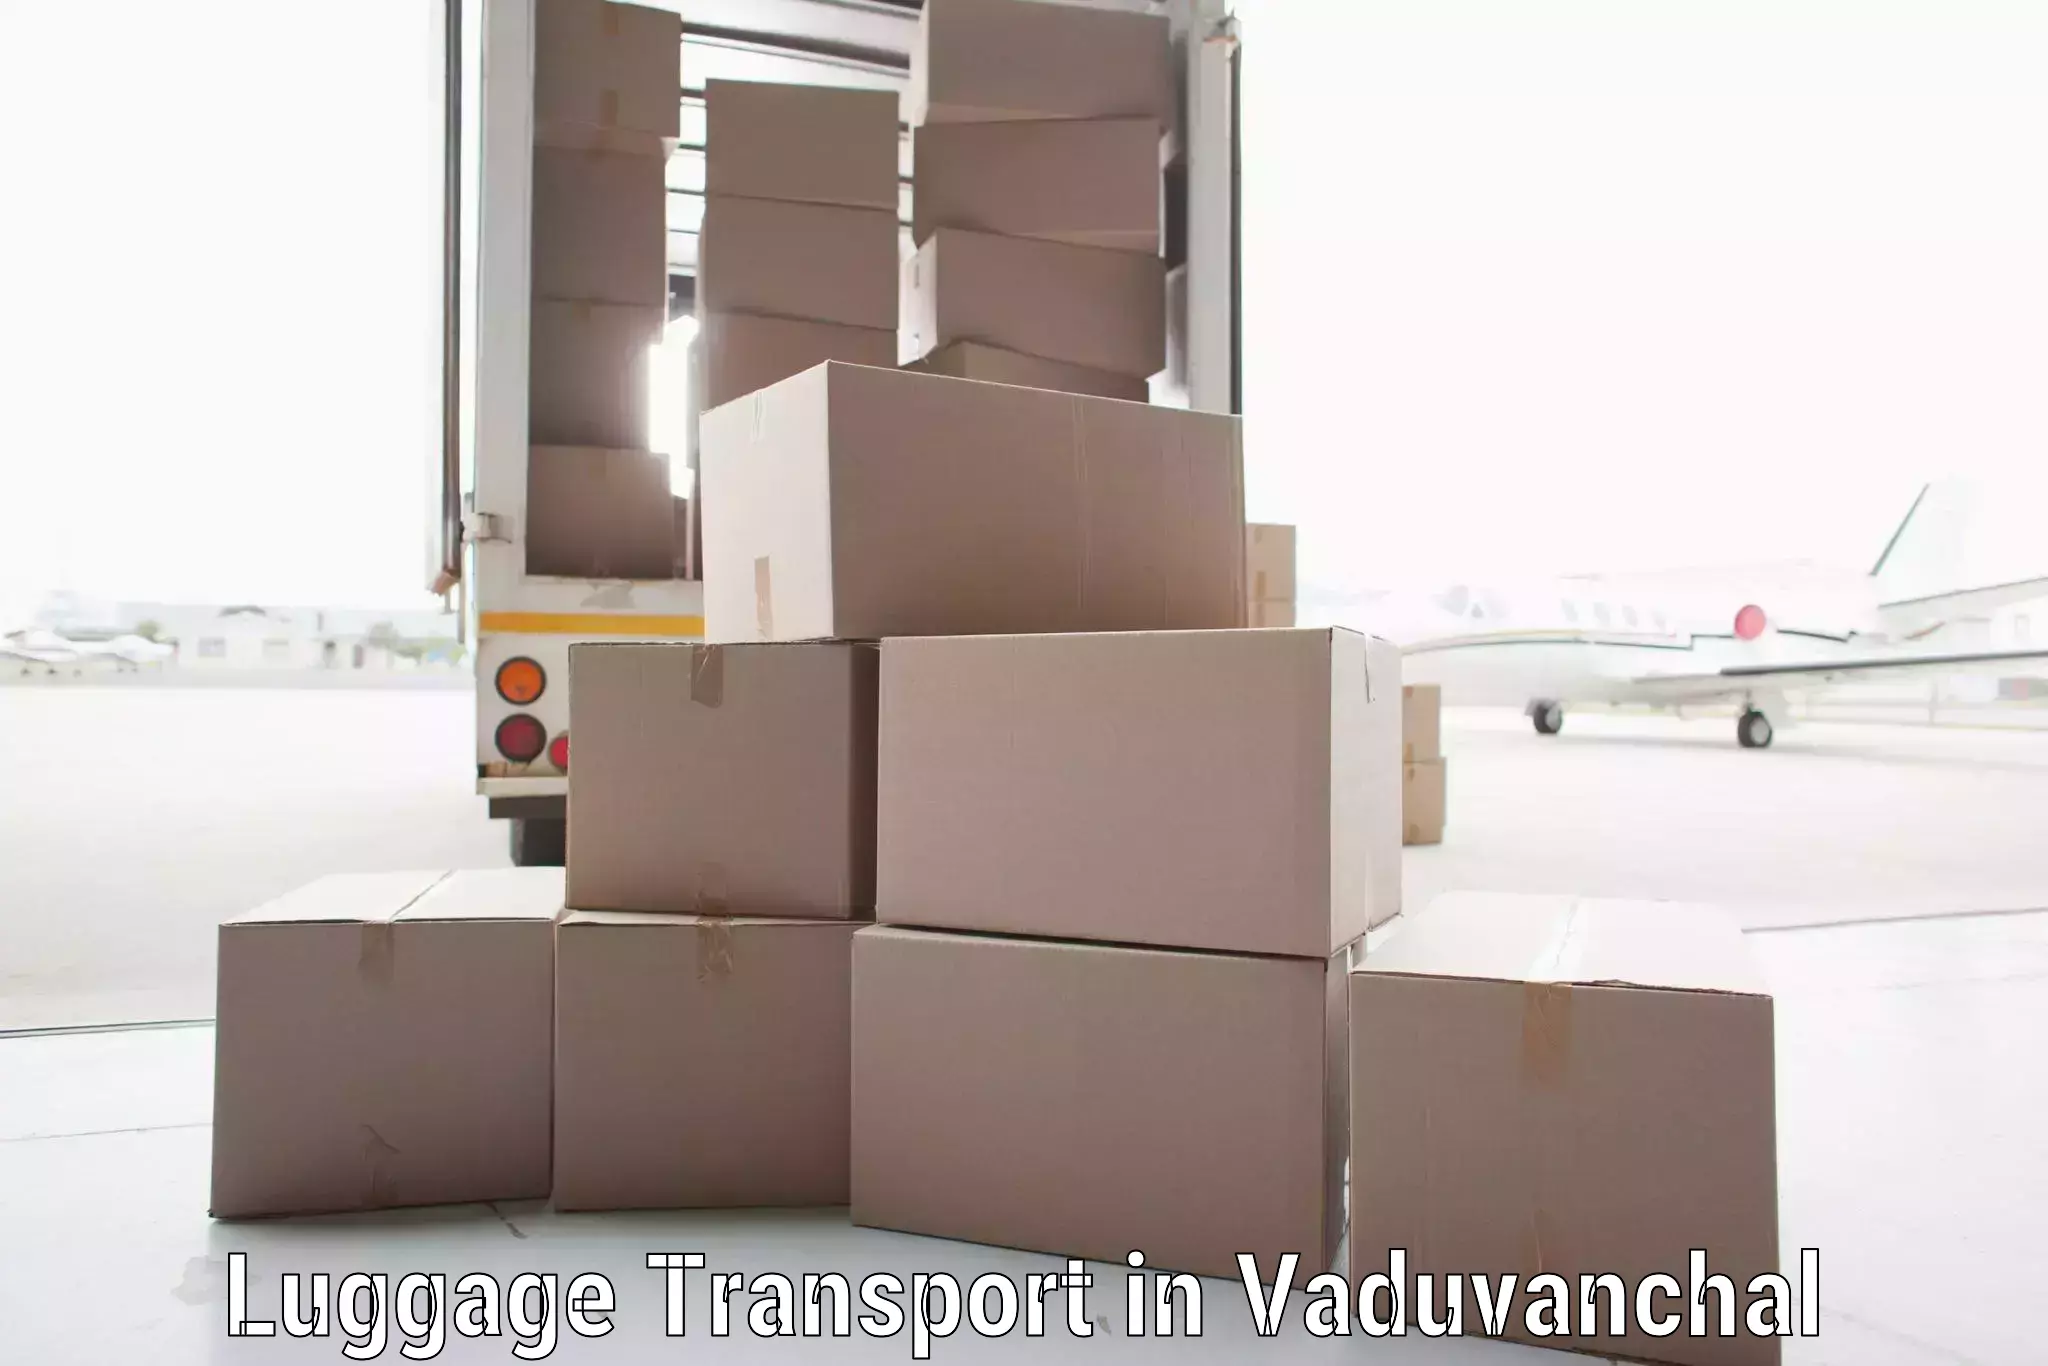 Student luggage transport in Vaduvanchal